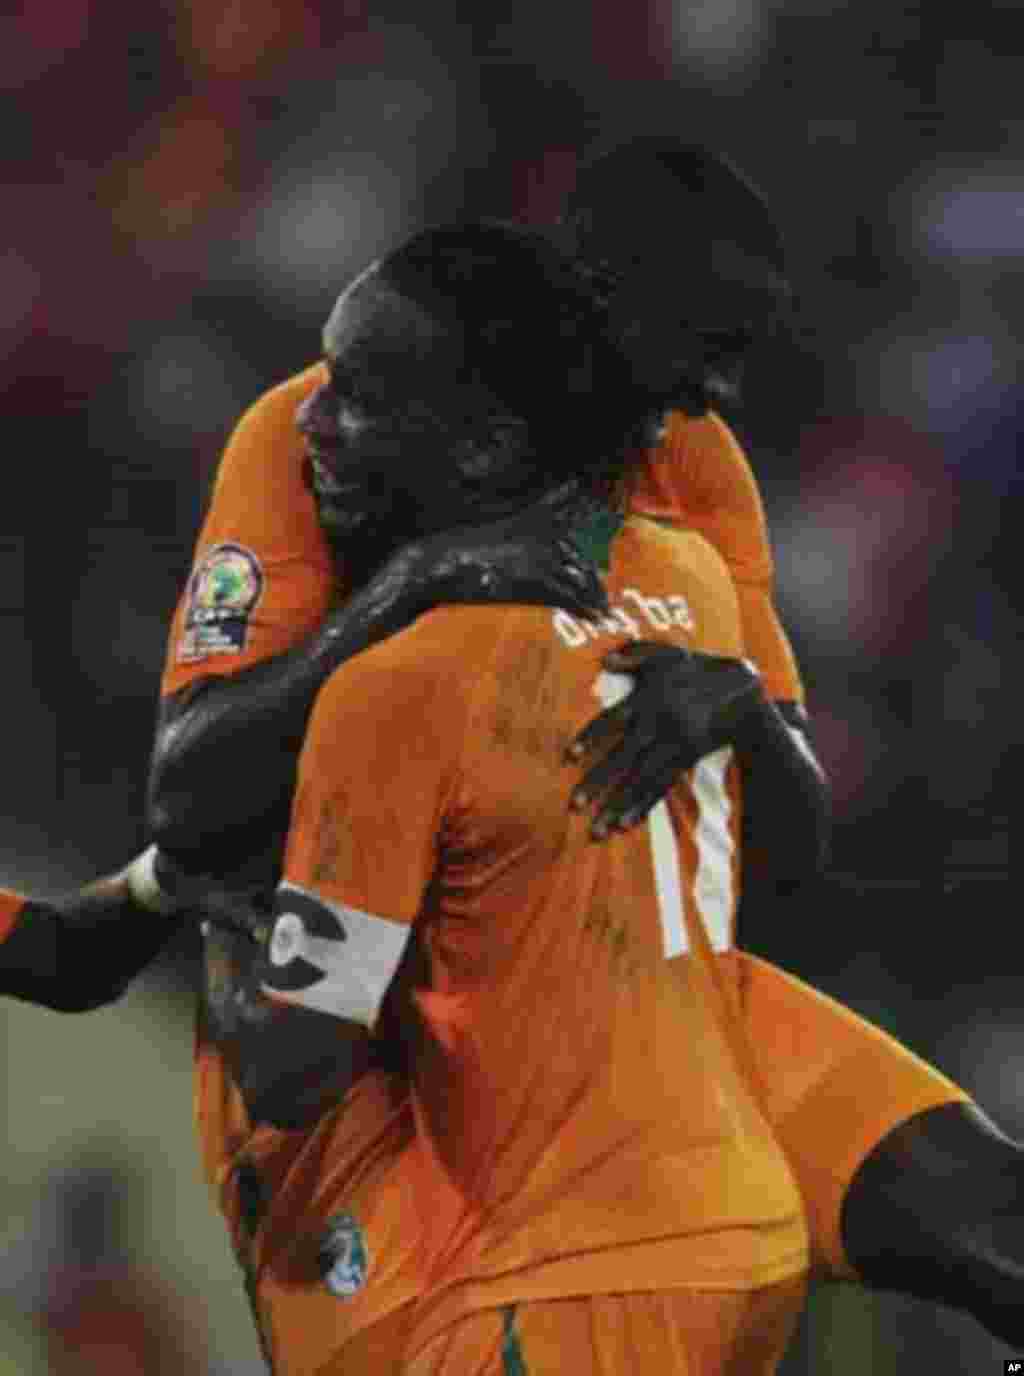 Yaya Toure (L) and Didier Drogba of Ivory Coast celebrate after scoring against Equatorial Guinea during their quarter-final match at the African Nations Cup soccer tournament in Malabo February 4, 2012.